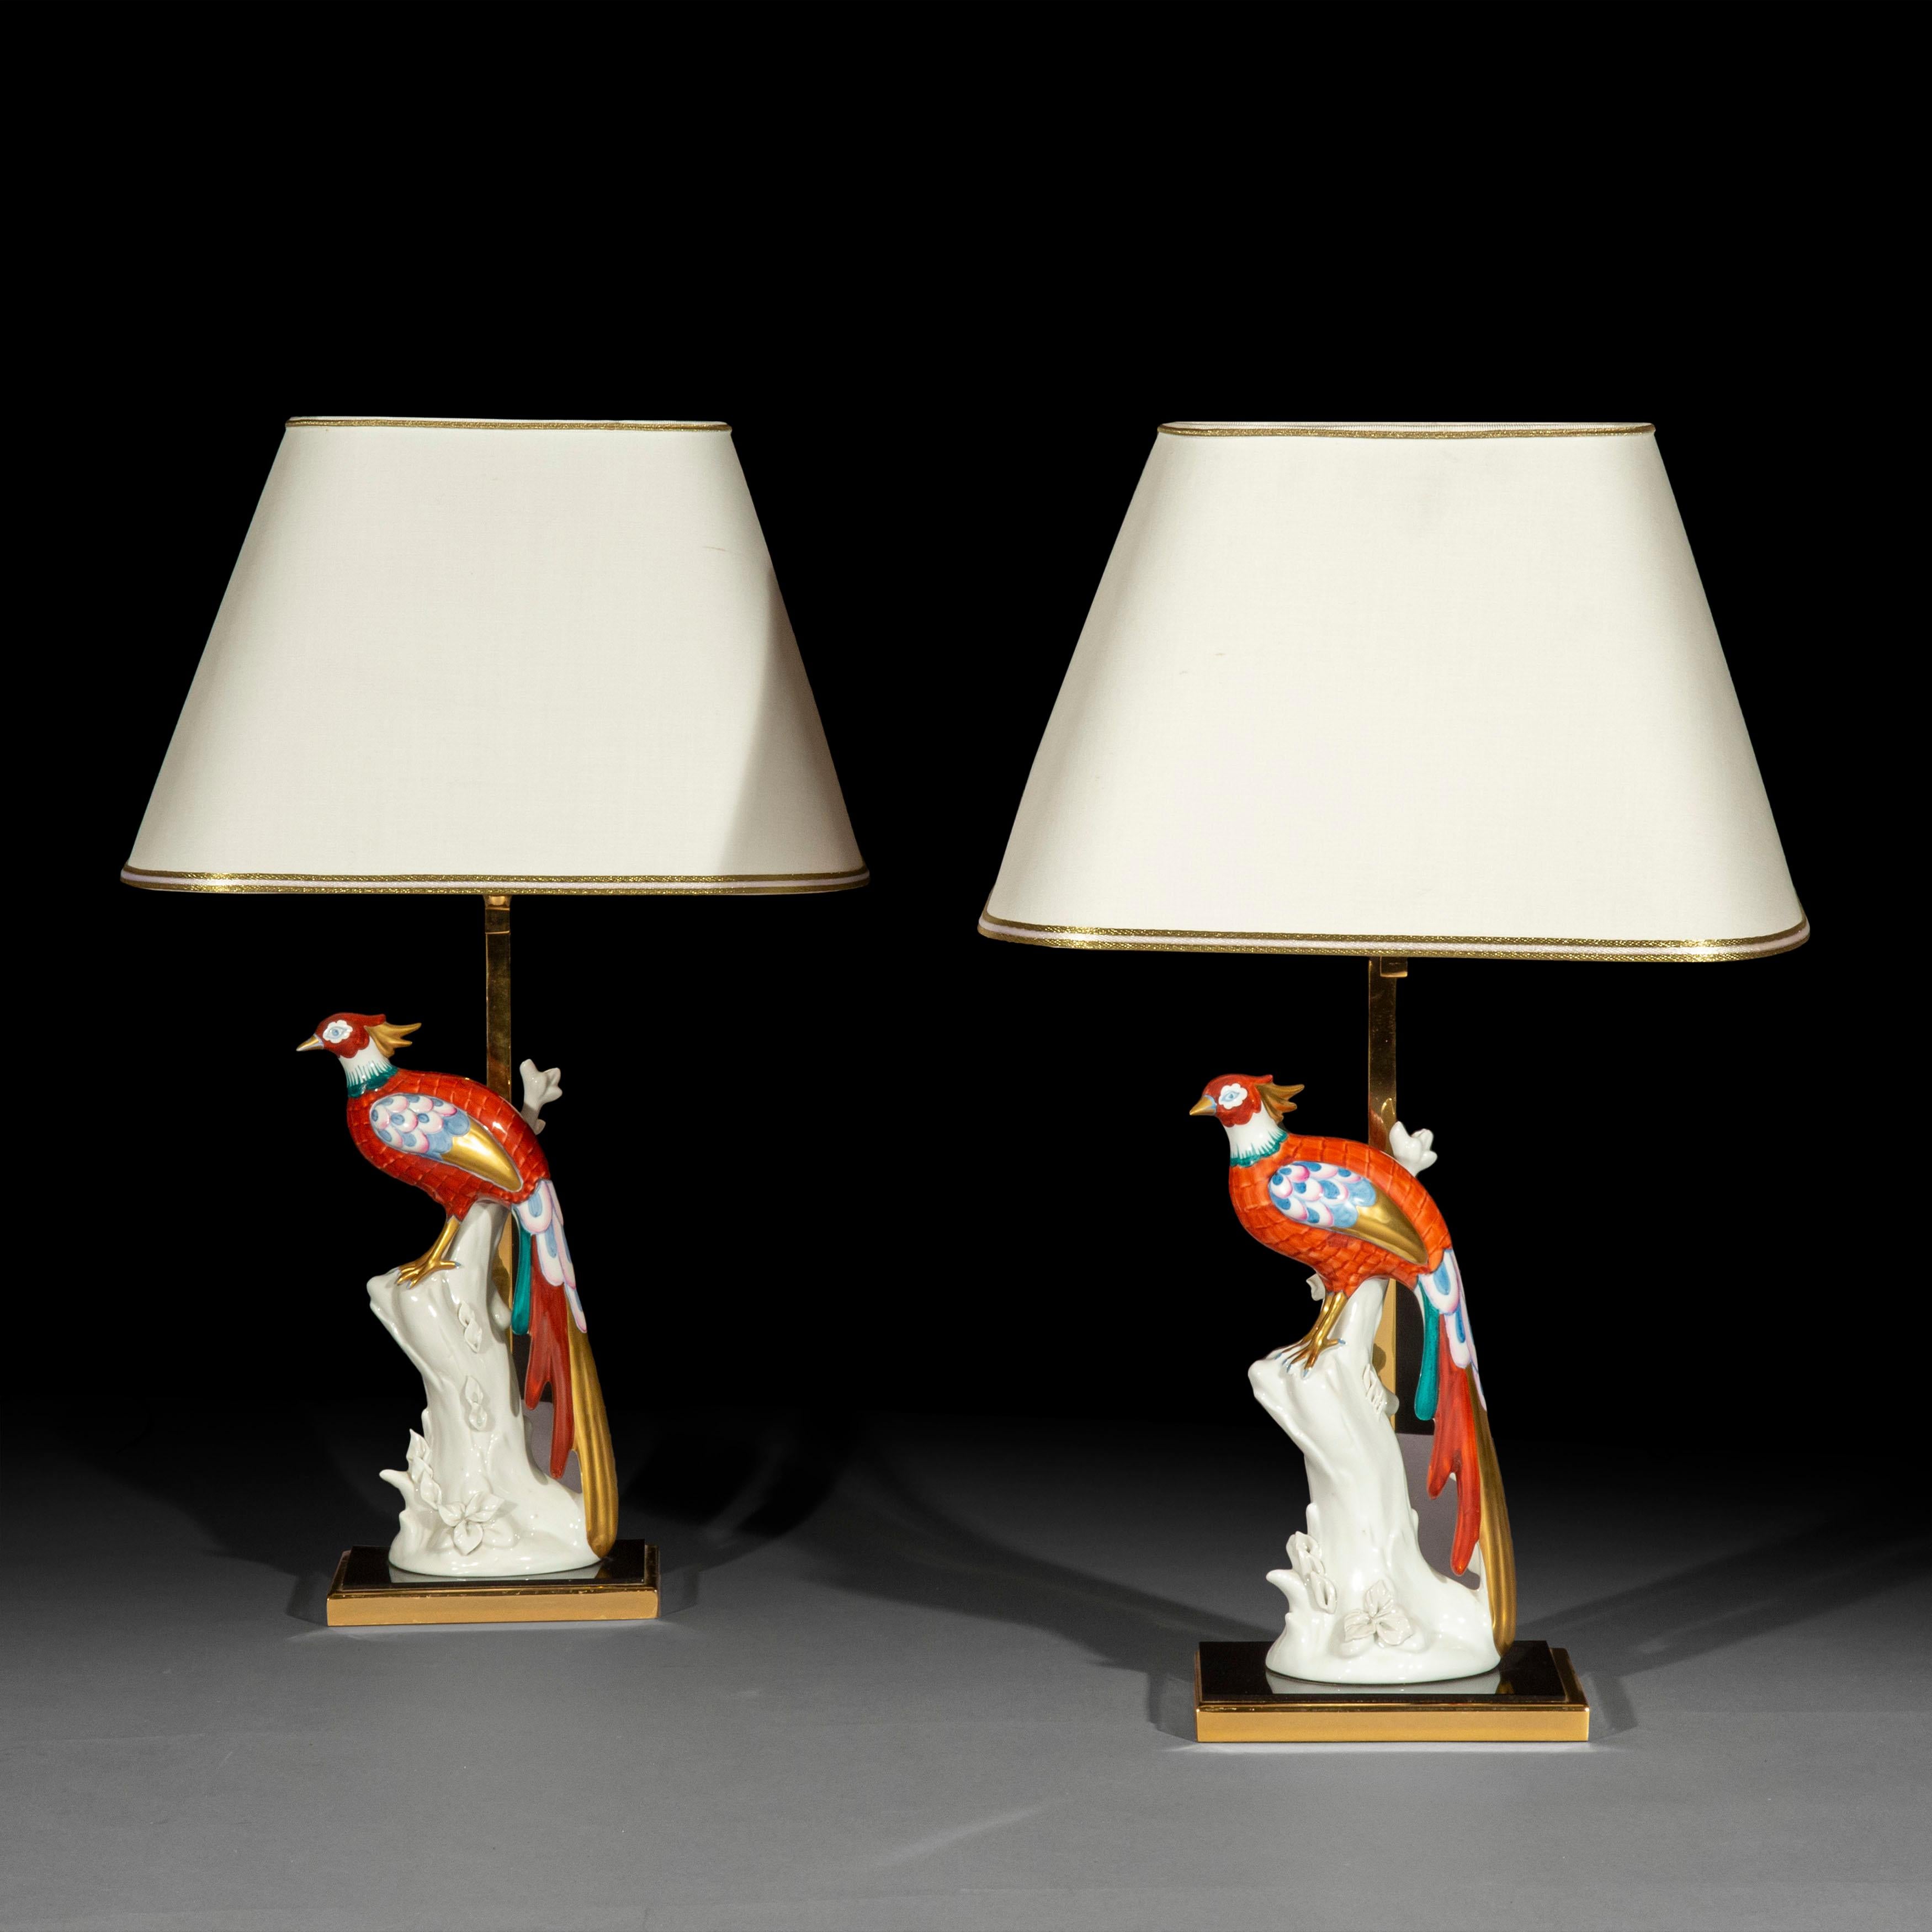 A very fine hand-made pair of porcelain bird figures mounted table lamps by Manifattura Le Porcellane, in the 18th century Chinese export taste, with original shades.
Italy, Florence, 20th century.

Why we like them
Reflecting the 18th century